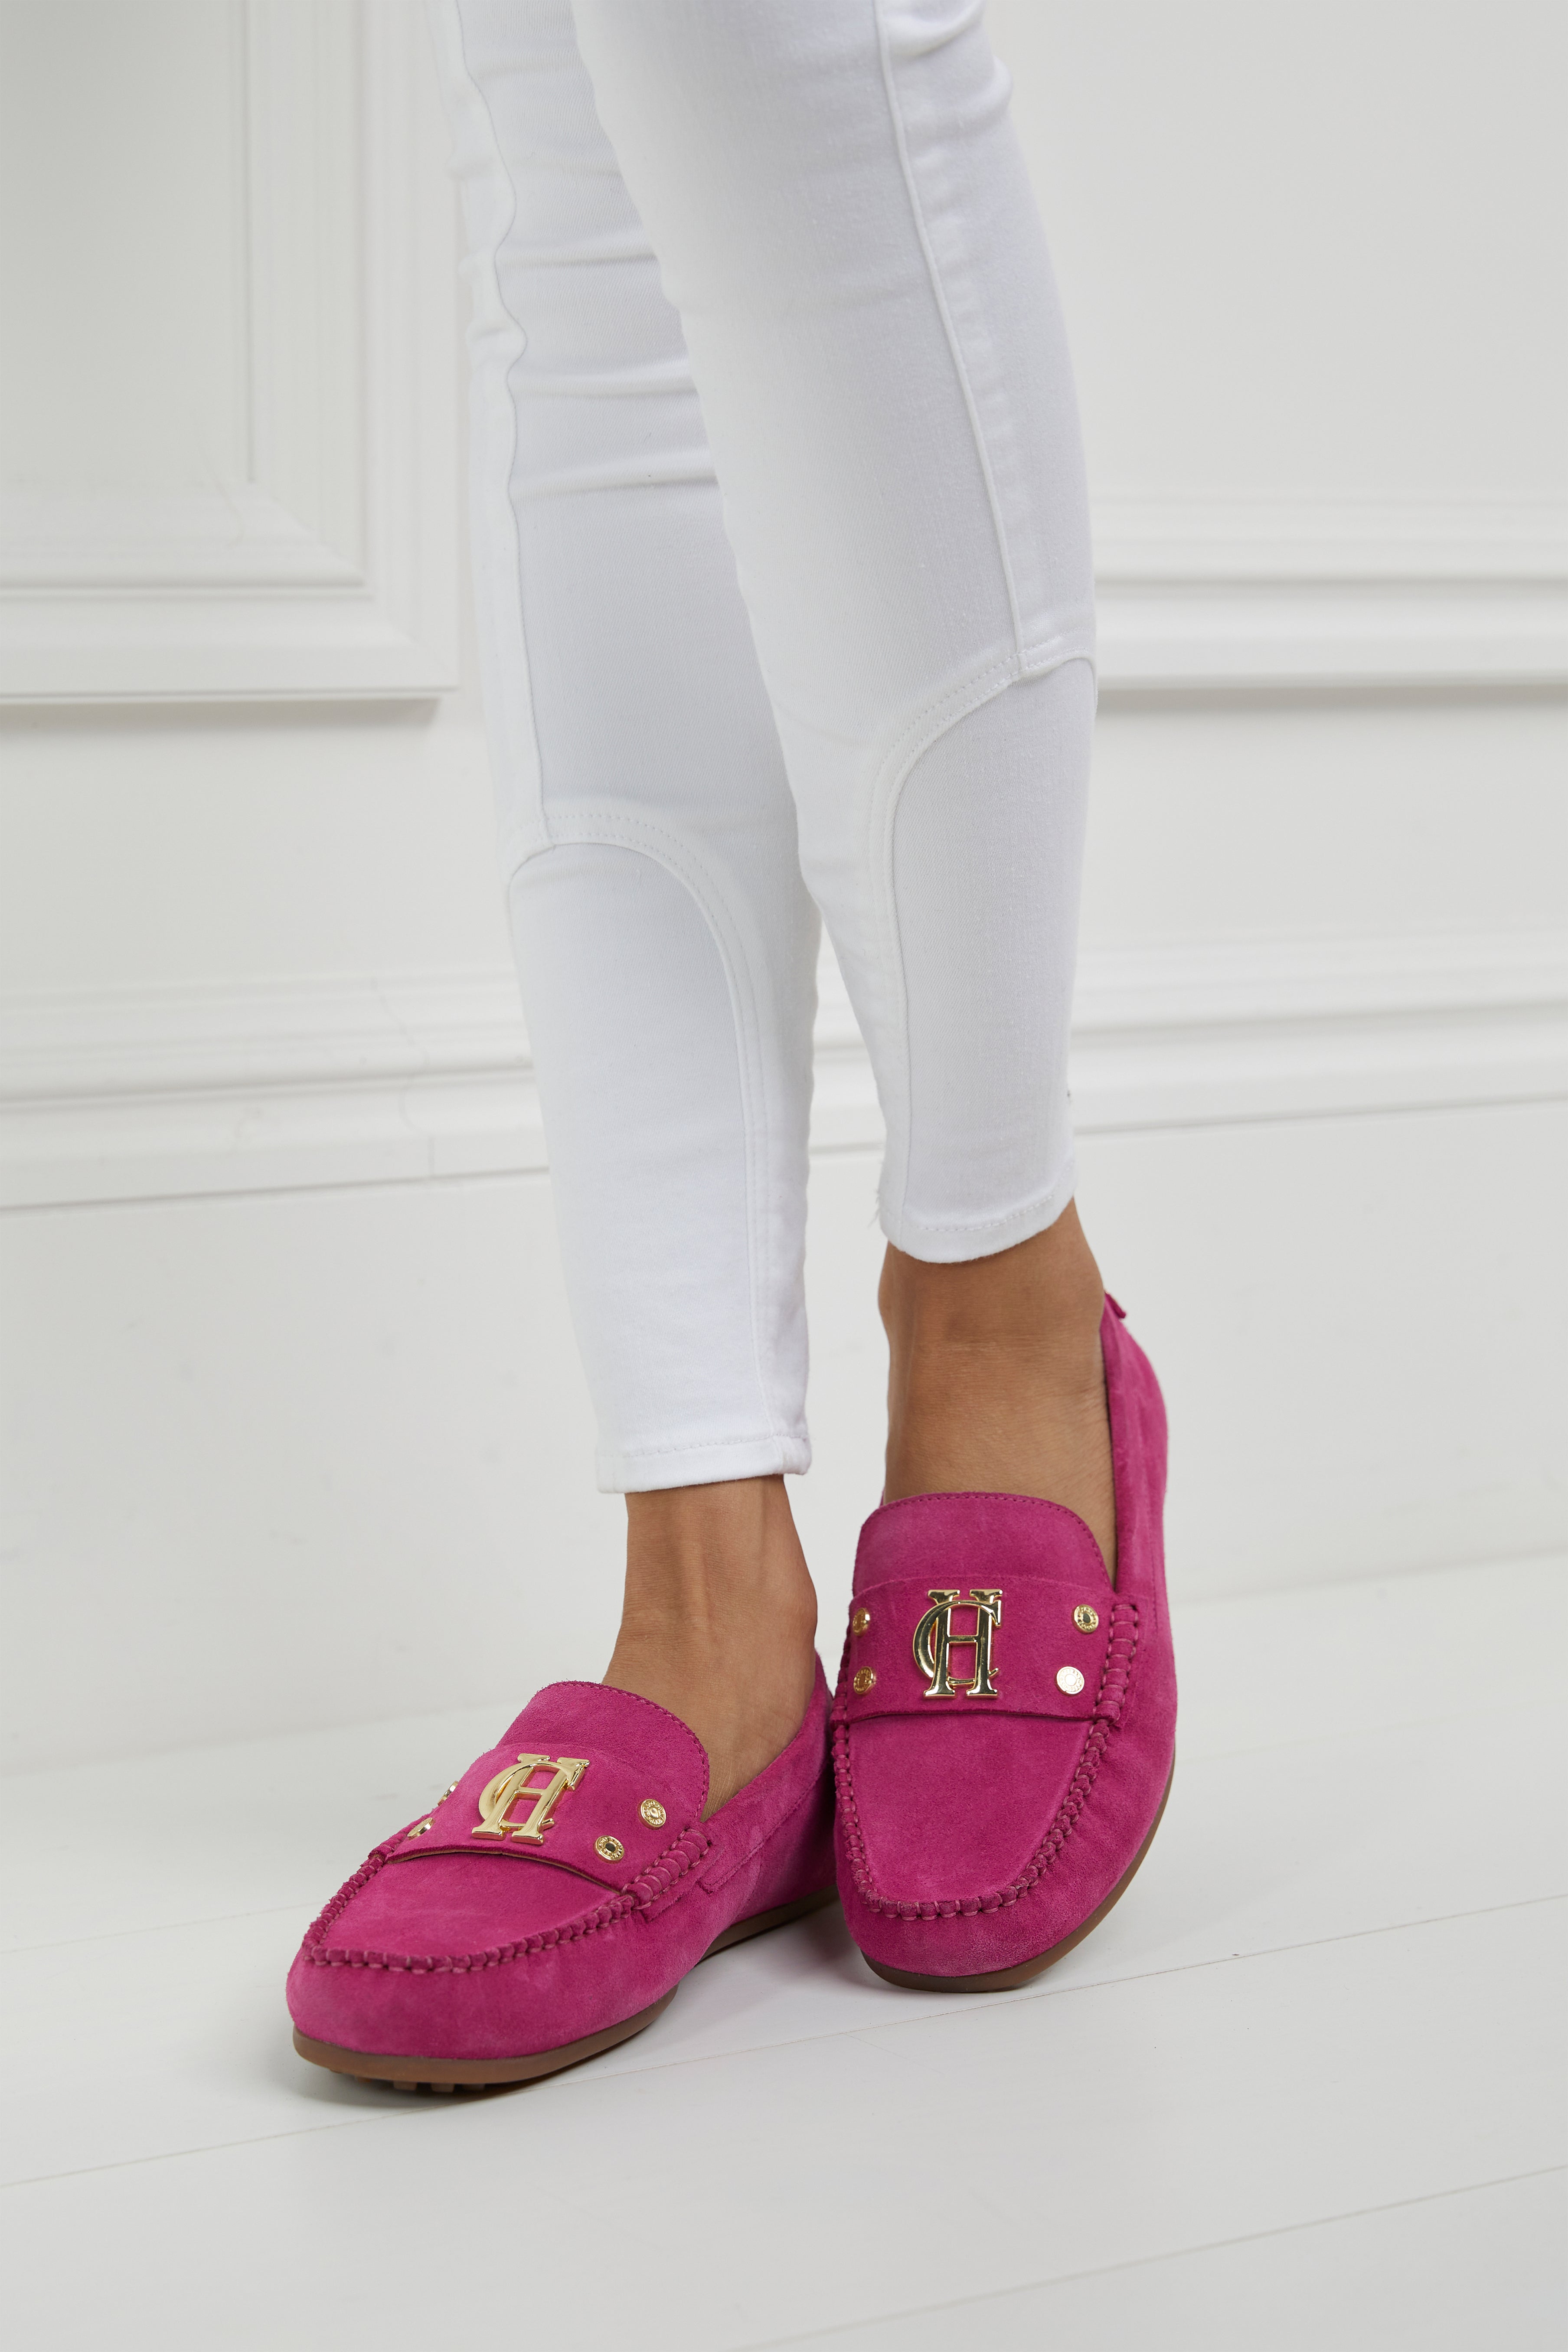 The Driving Loafer (Fuchsia) – Holland Cooper